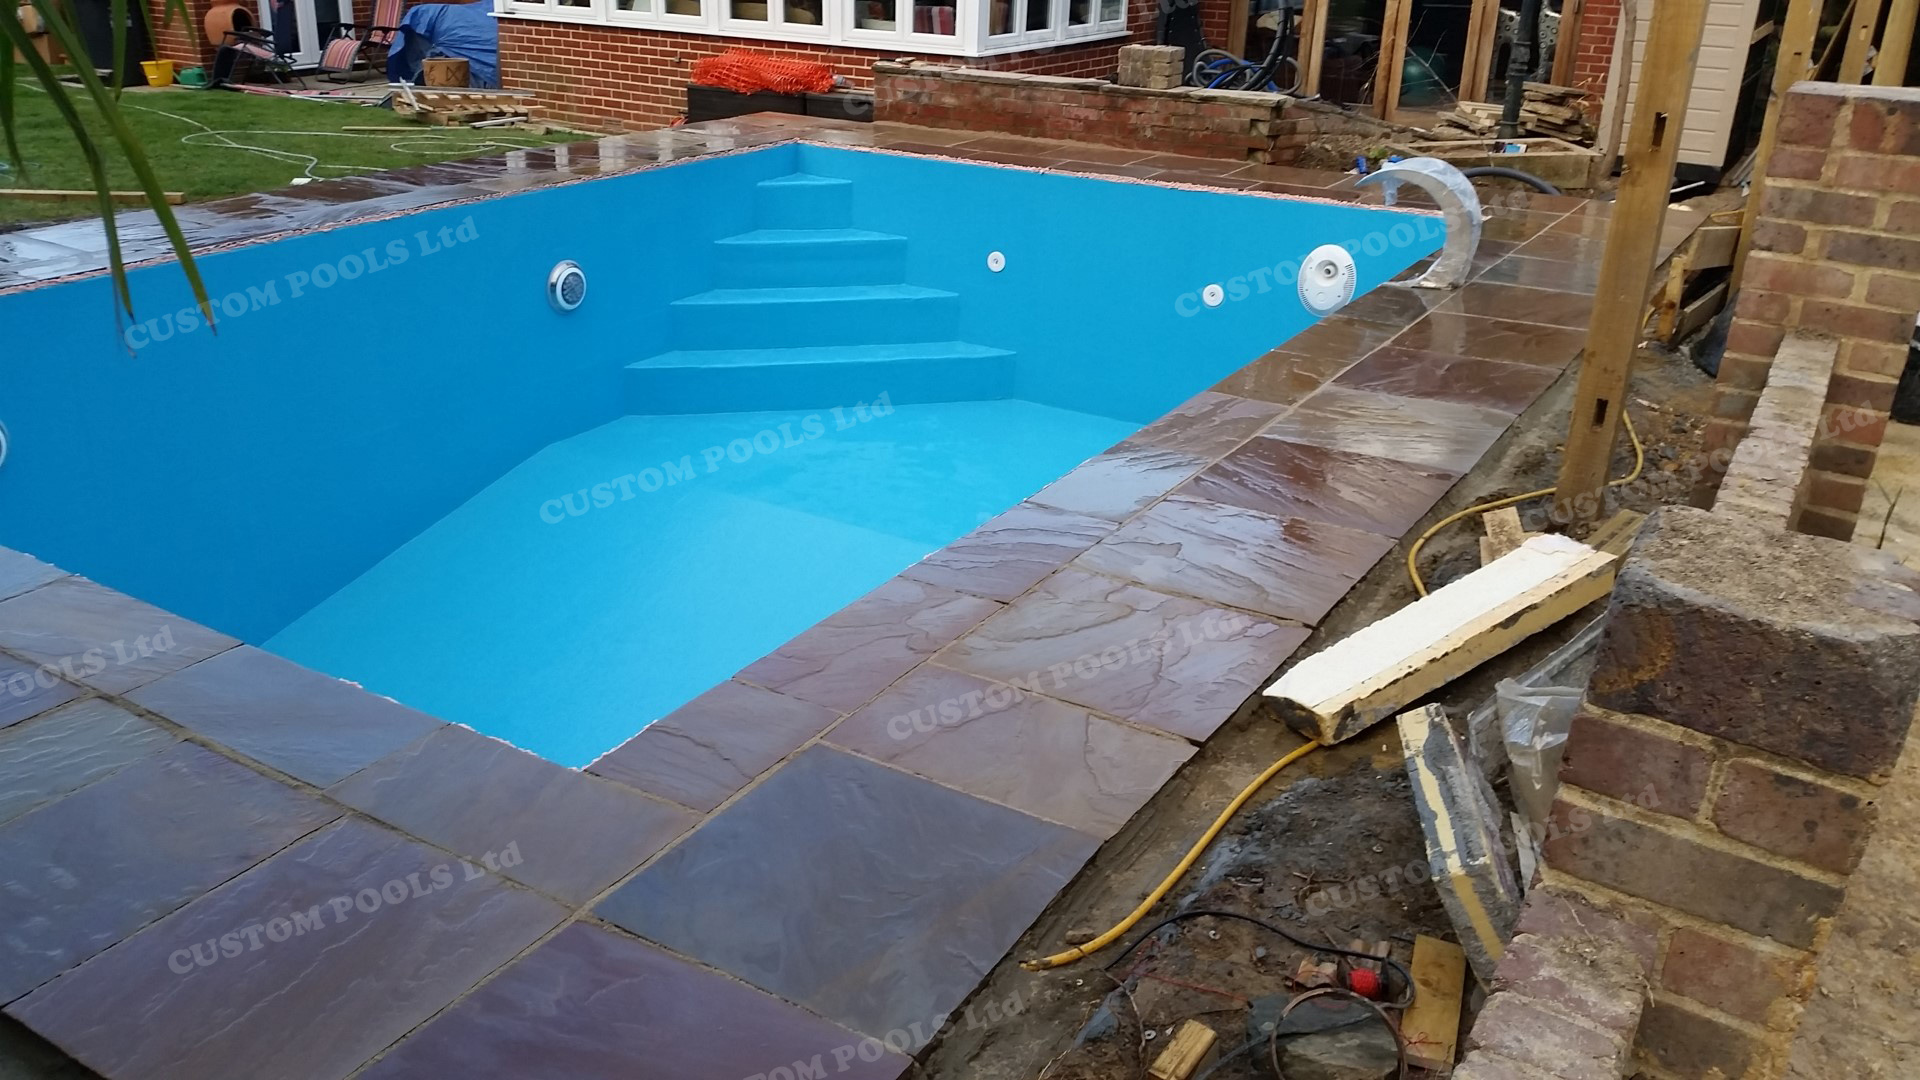 Made to order fibreglass pool with waterfall